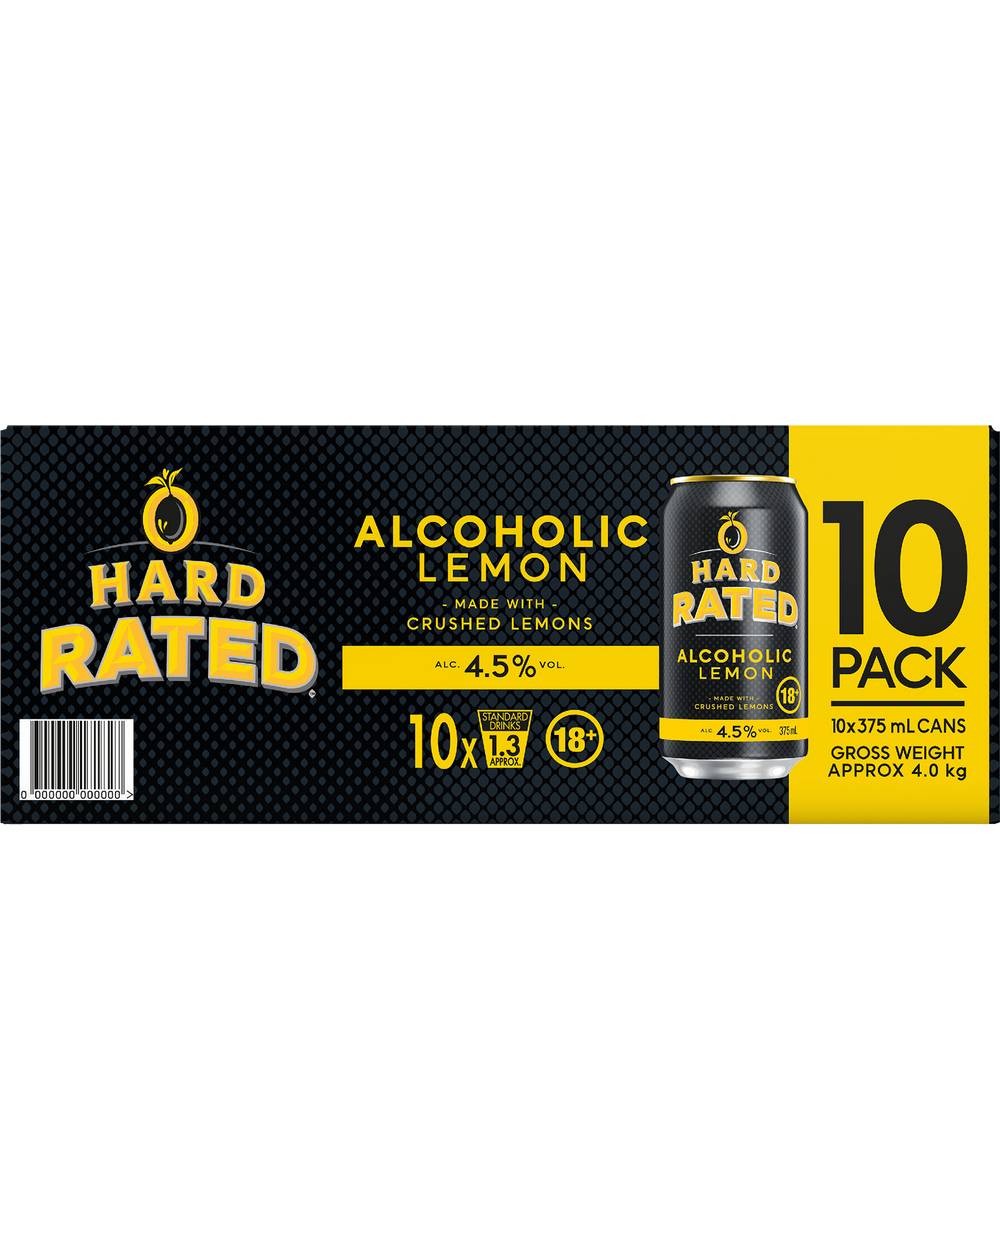 Hard Rated Can 10x375mL